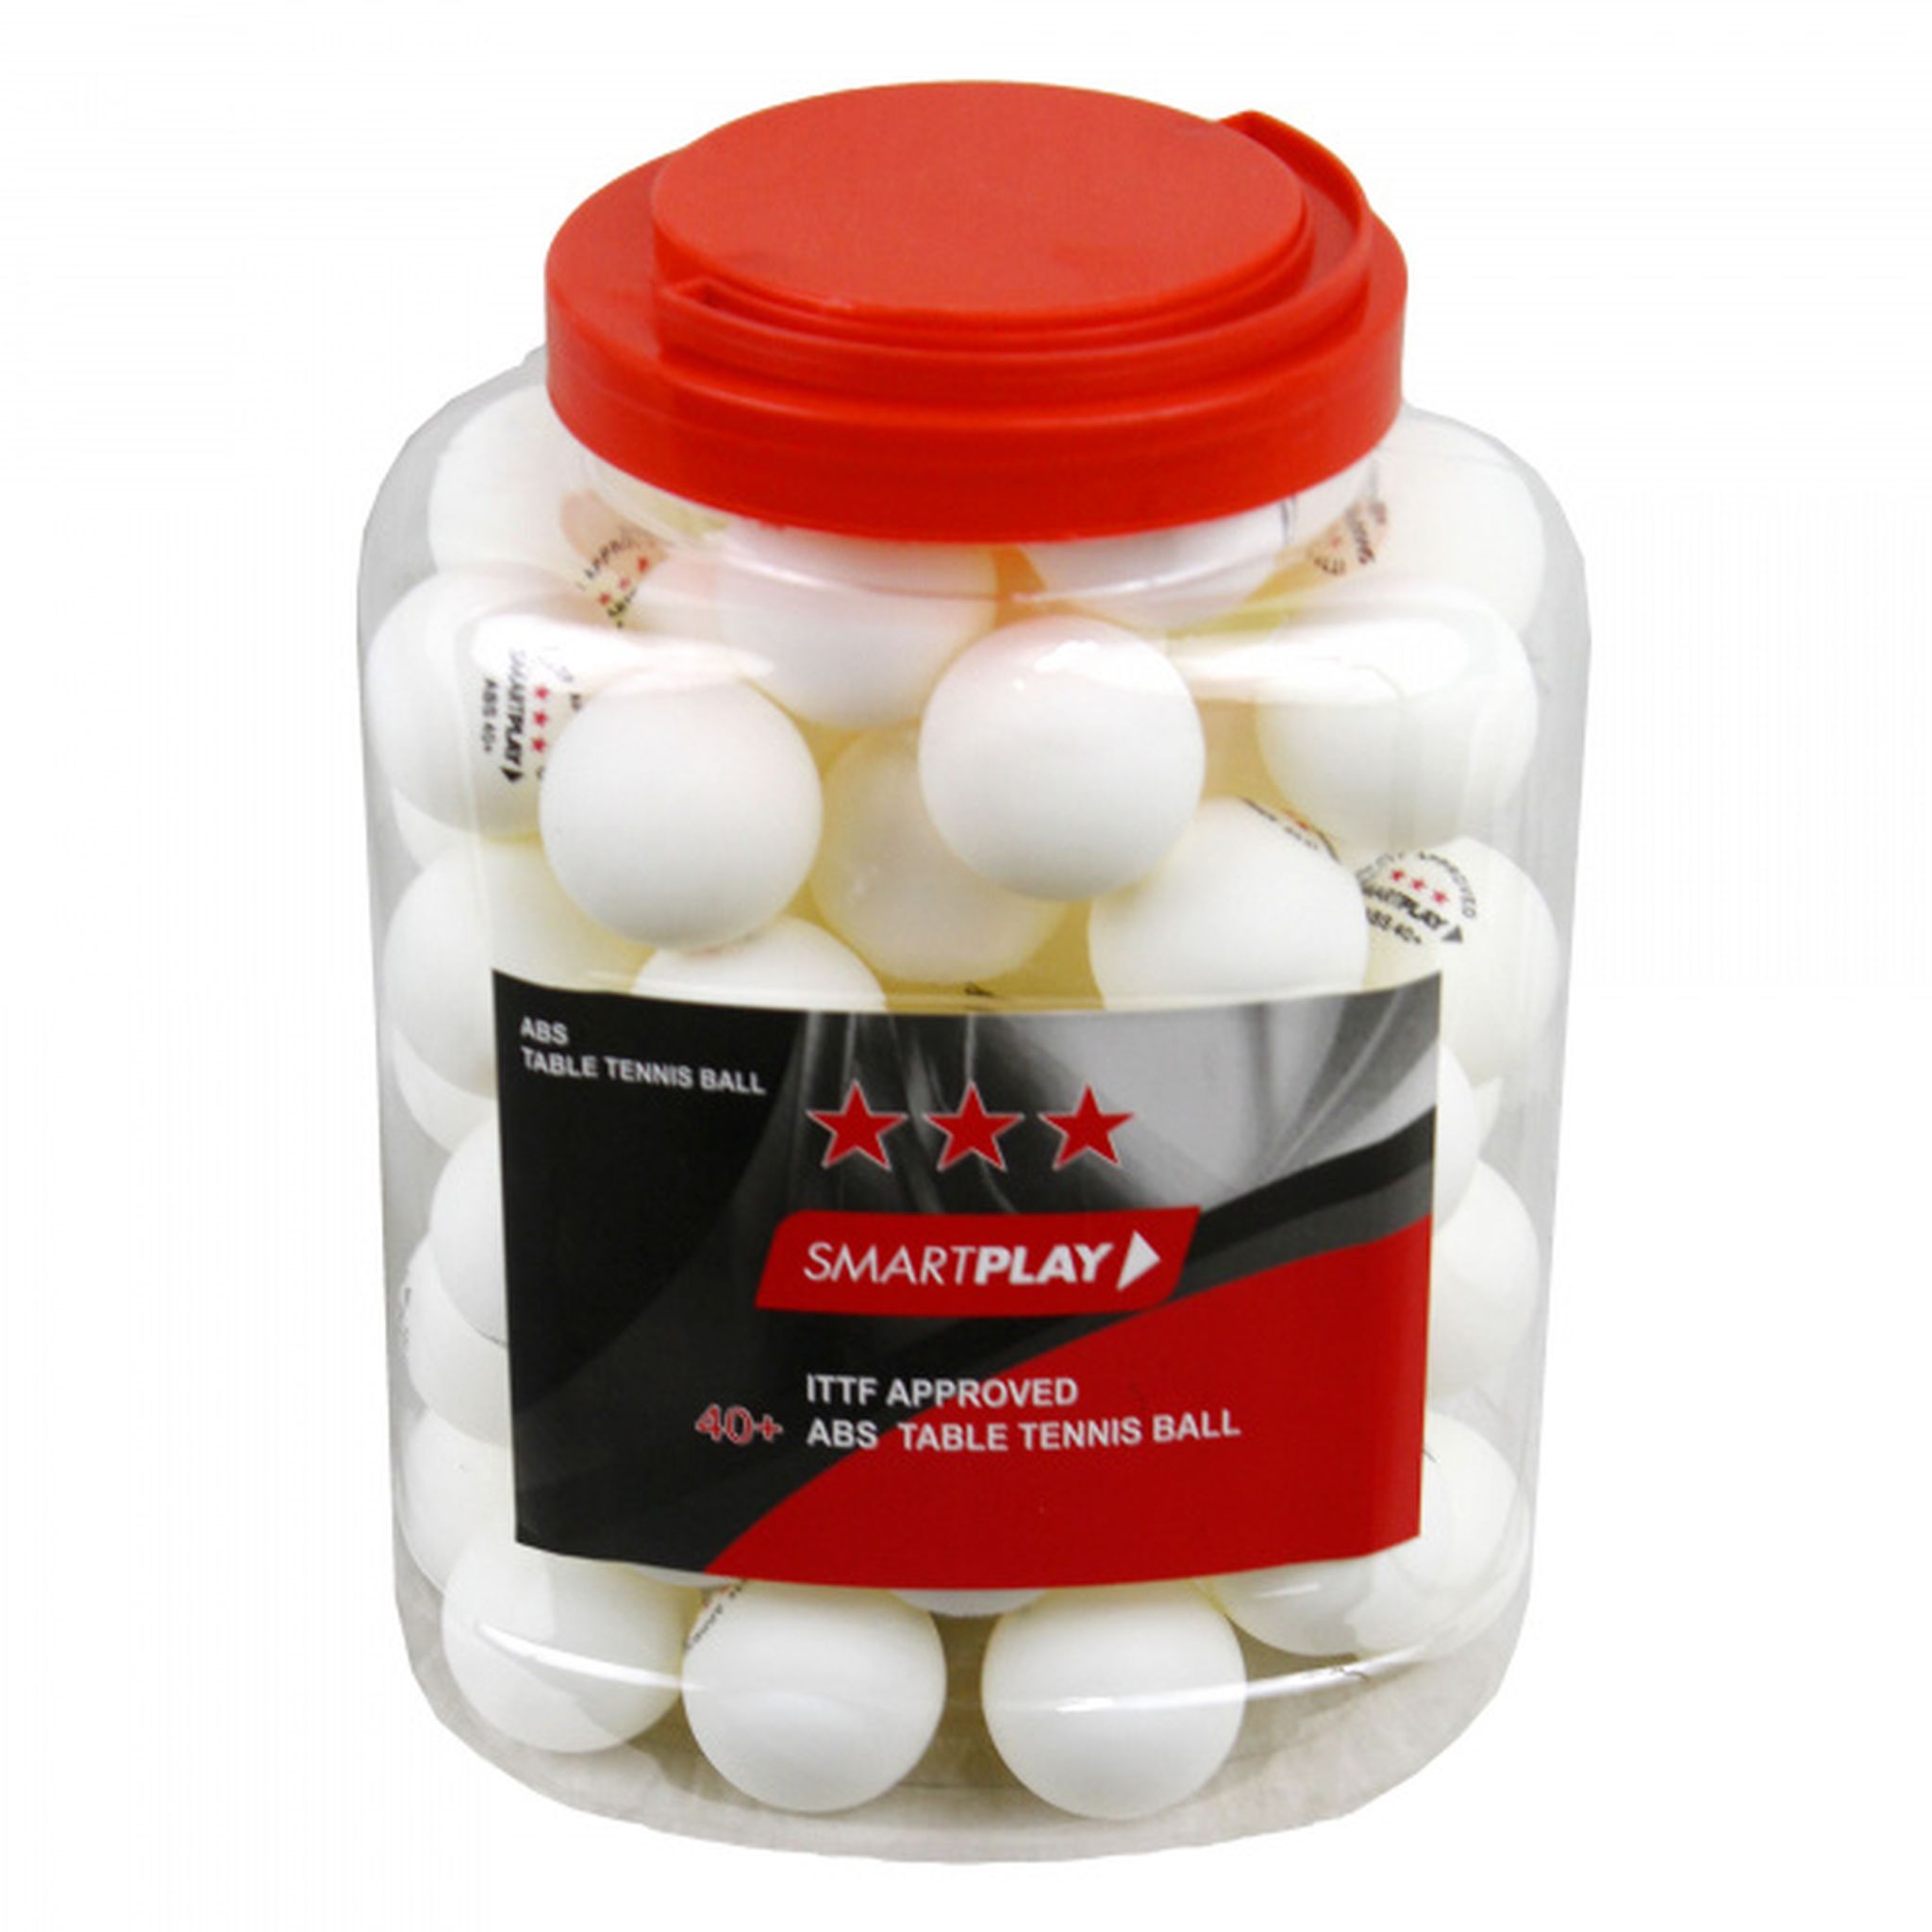 SMARTPLAY 3 Star ITTF Approved WHITE Table Tennis Balls - PACK OF 60